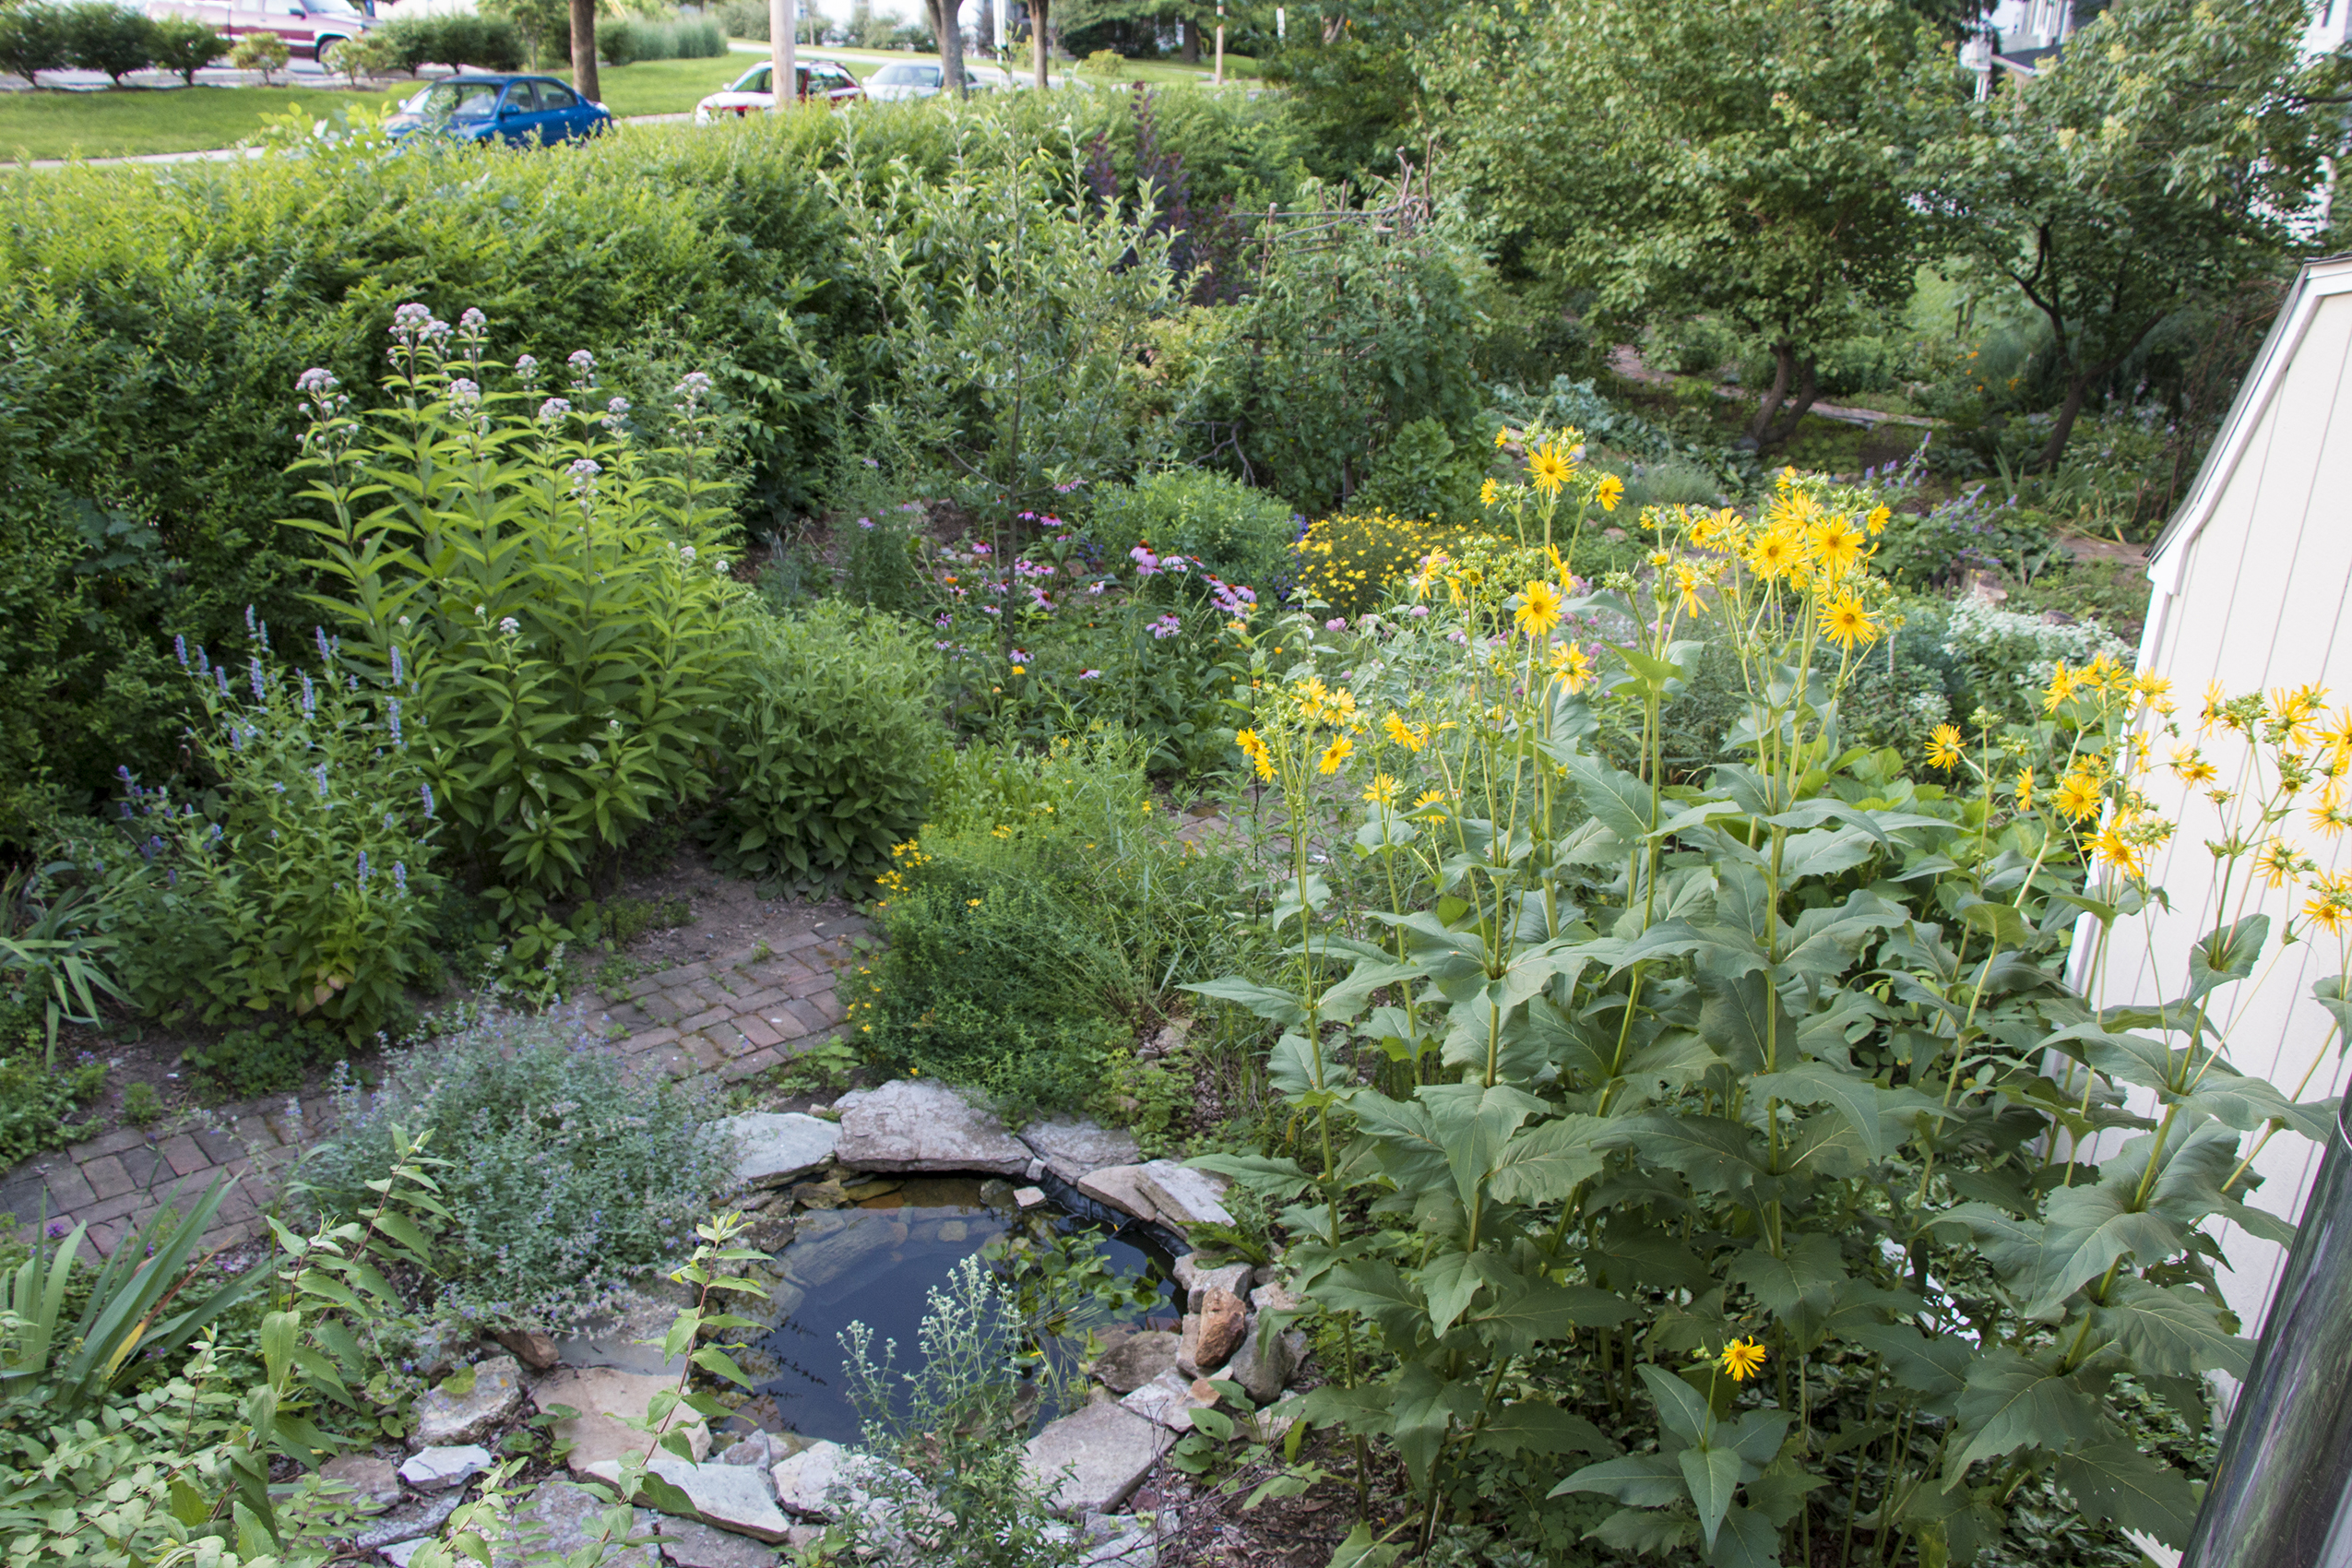 A urban garden full of pink, blue, purple, and yellow flowers surrounding a small pong.